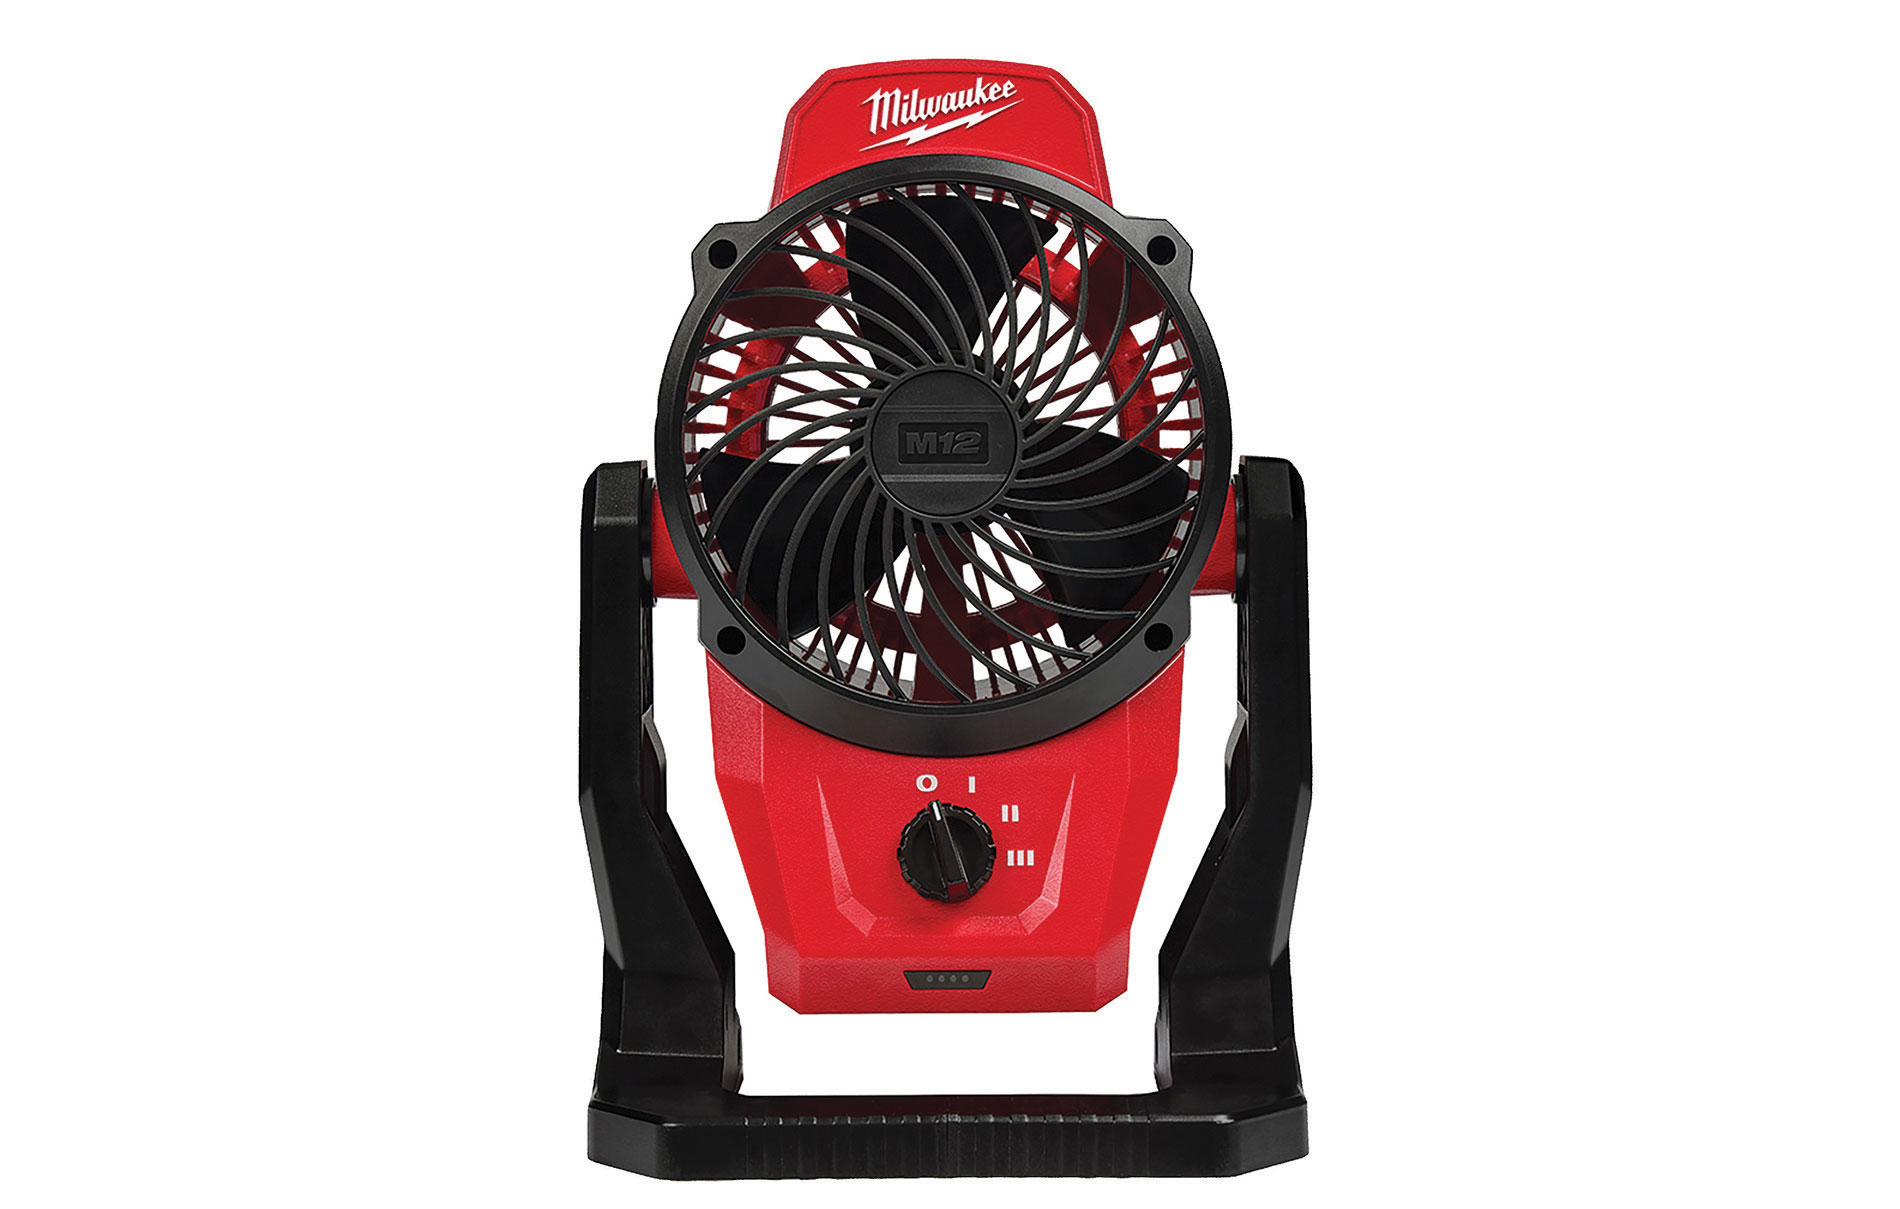 Red and black fan. Image by Milwaukee Tool Corp.